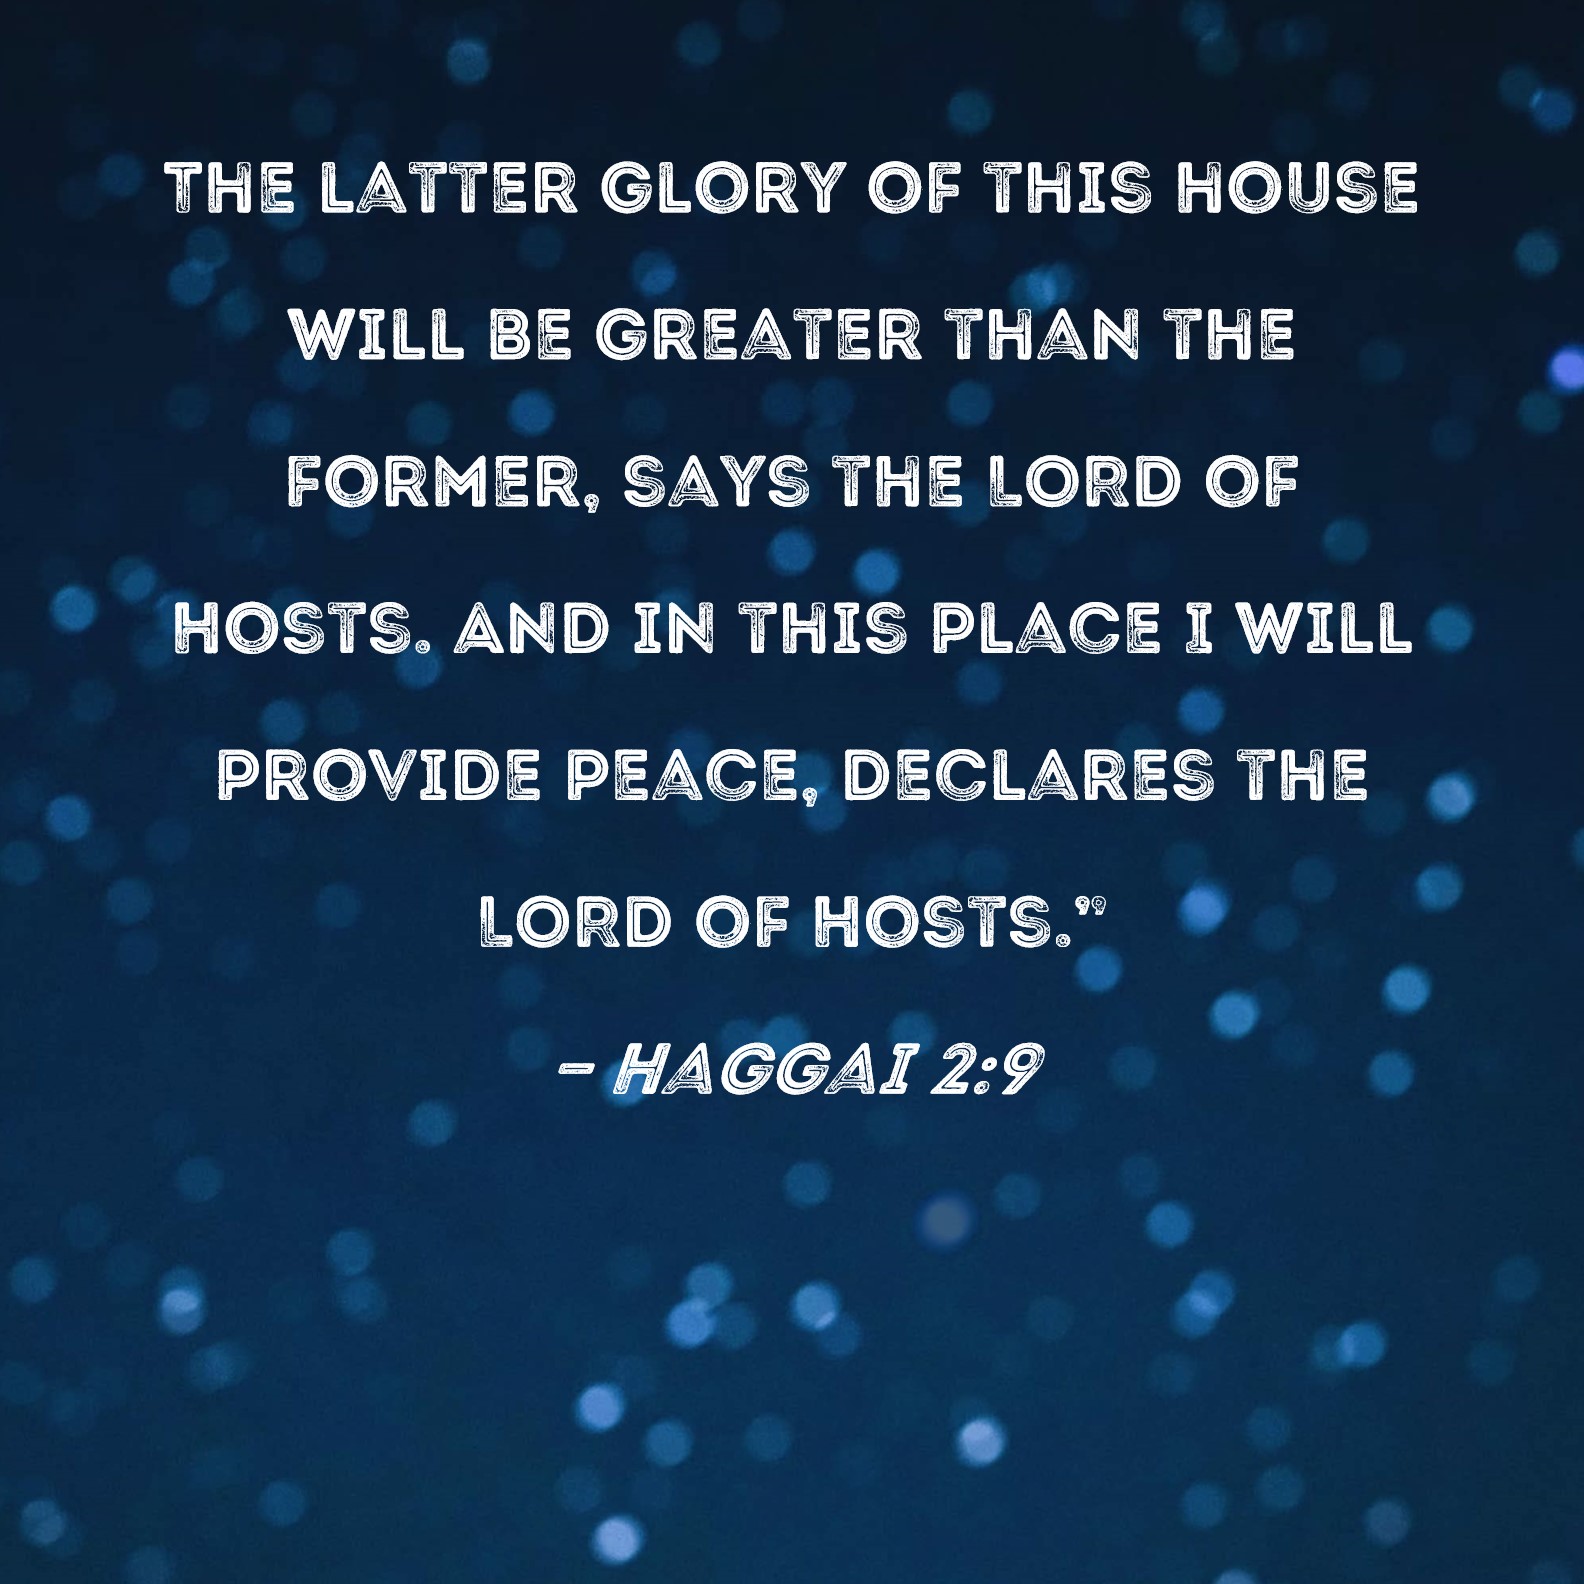 Haggai 2 9 The Latter Glory Of This House Will Be Greater Than The Former Says The Lord Of Hosts And In This Place I Will Provide Peace Declares The Lord Of Hosts